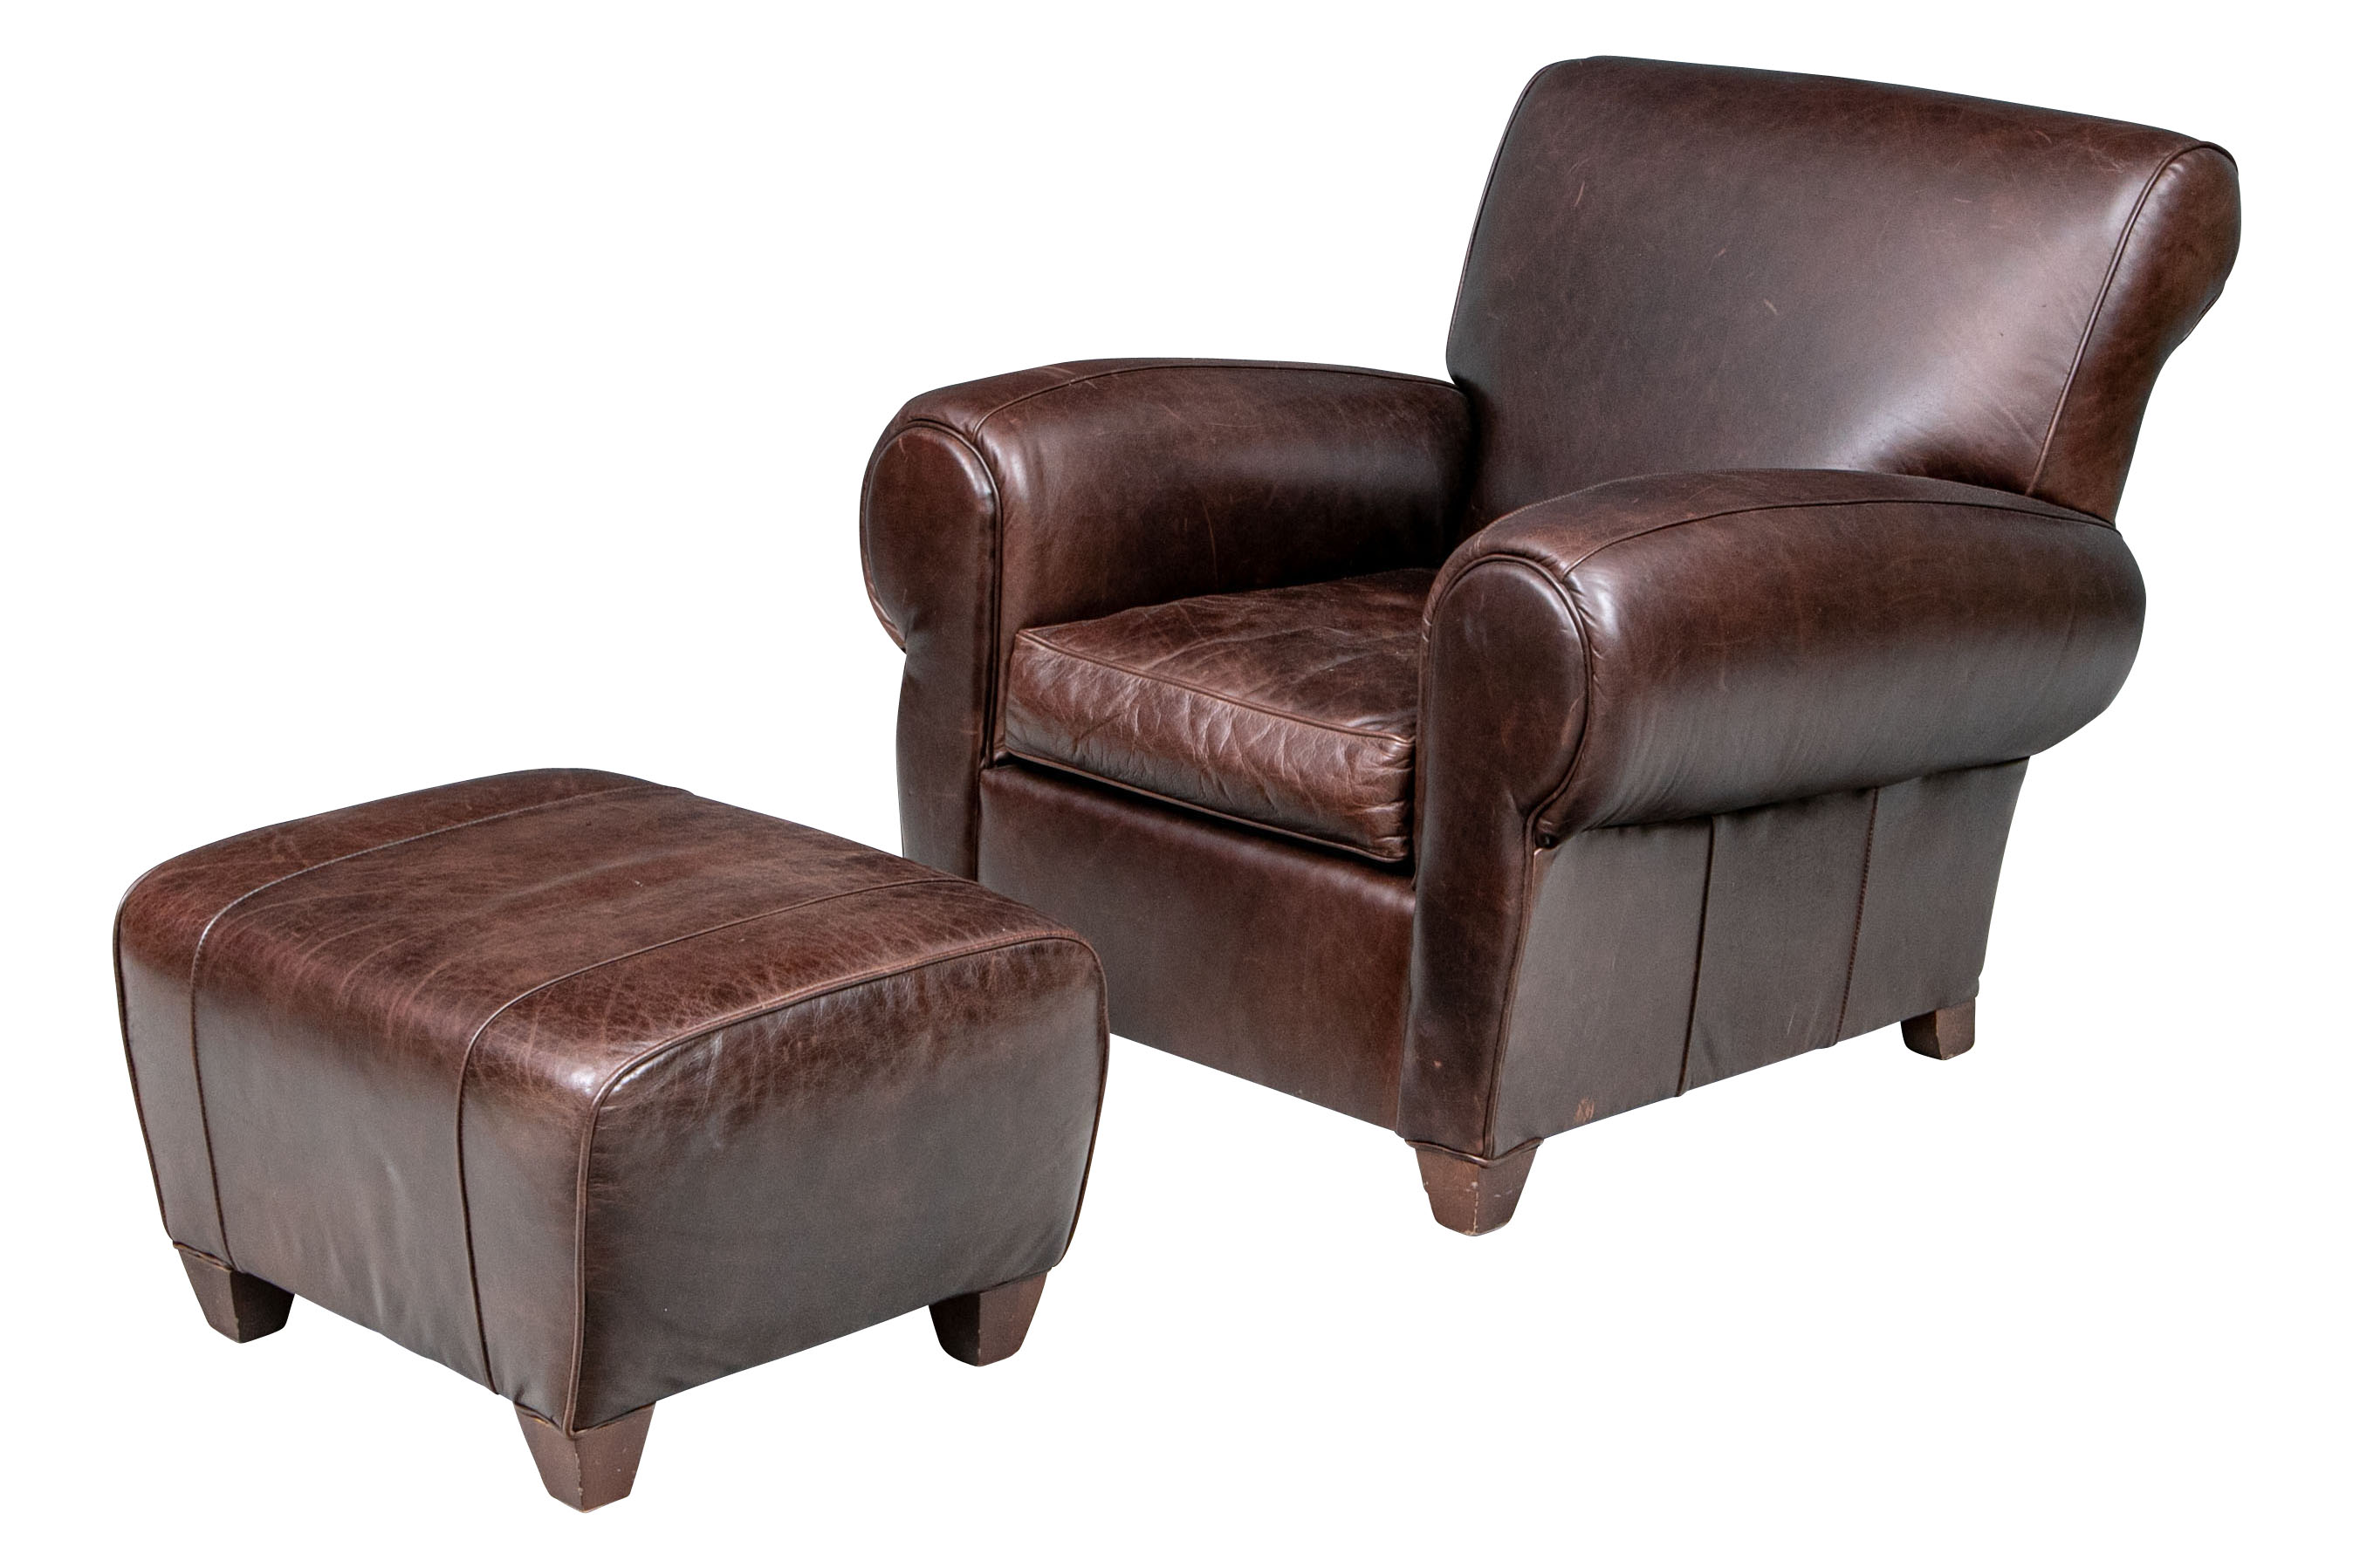 Mitc Gold Leather Club Chair And, Manhattan Leather Club Chair